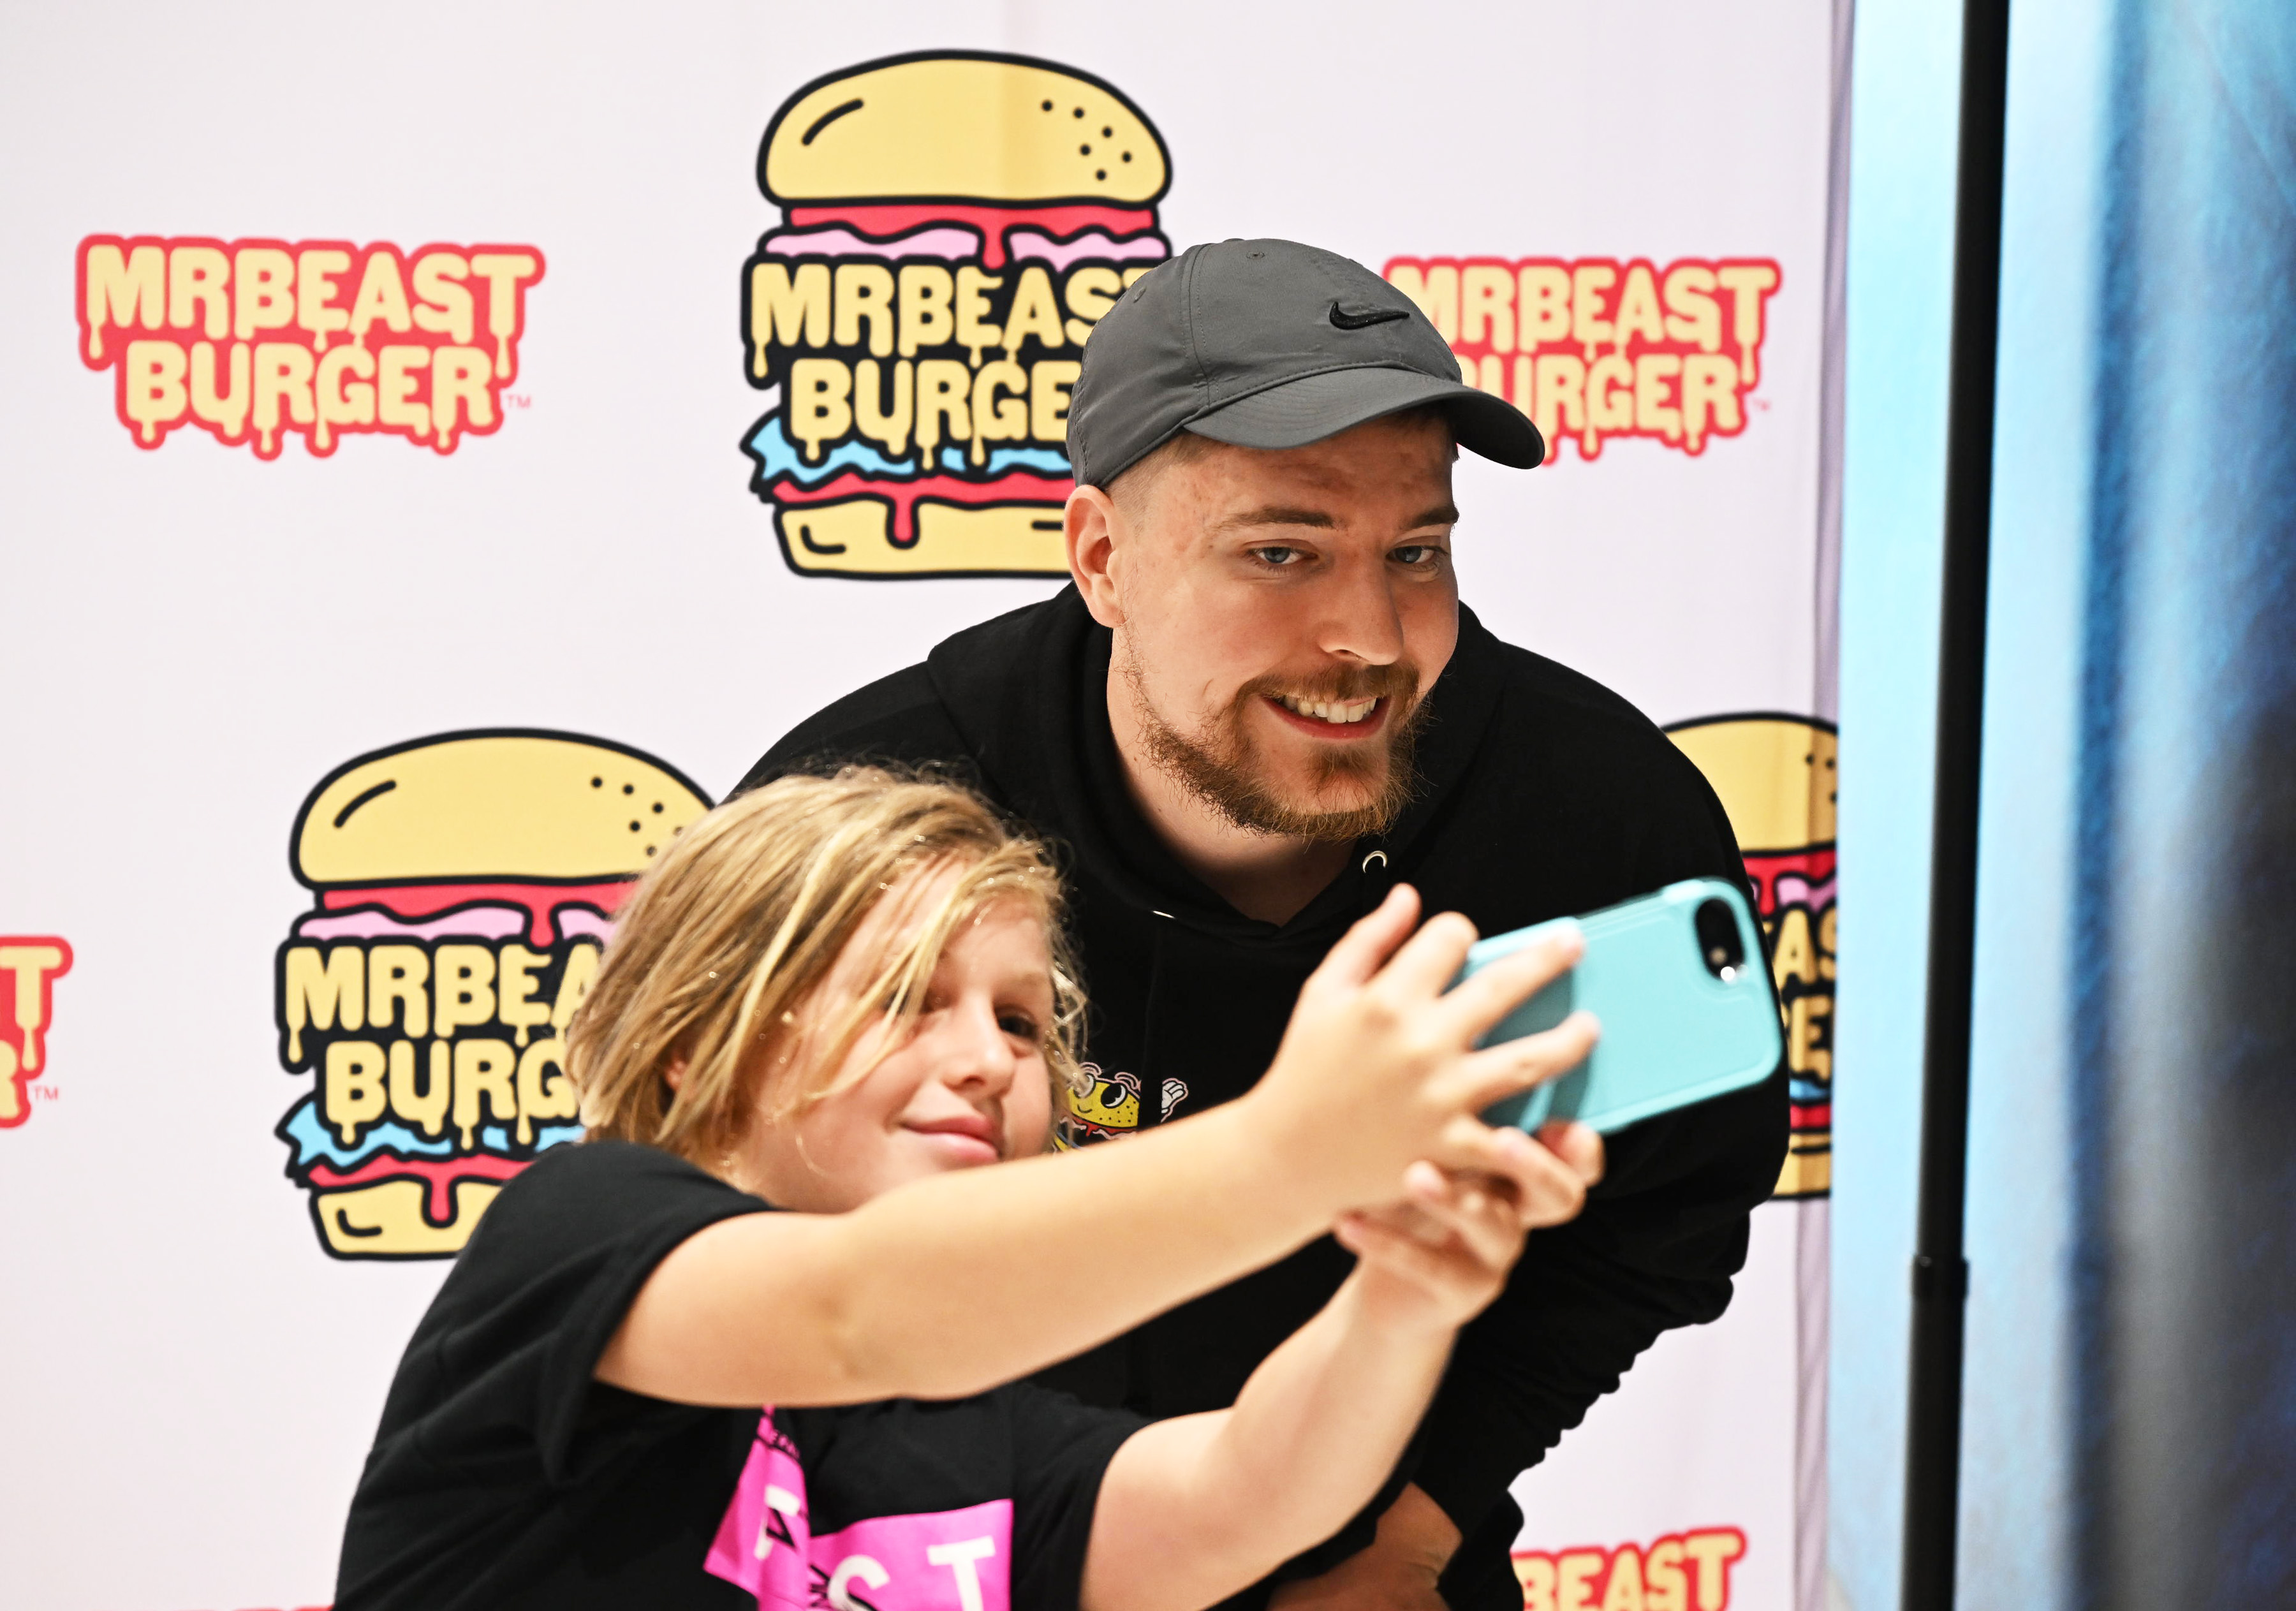 Who is MrBeast? The r behind burgers at American Dream